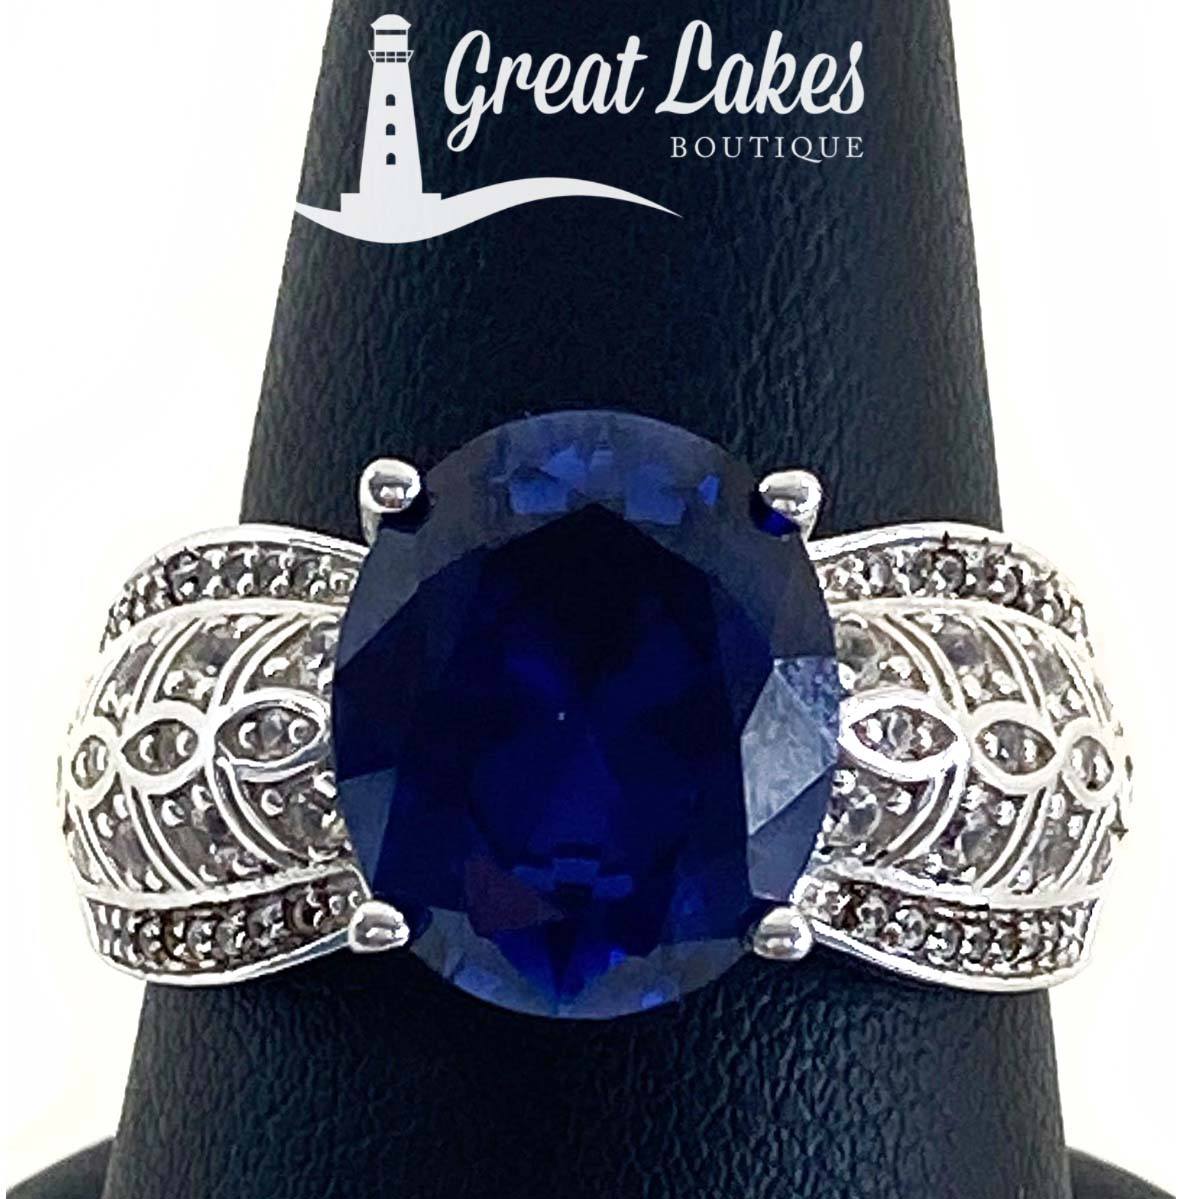 Great Lakes Boutique Silver &amp; Blue Stone Ring